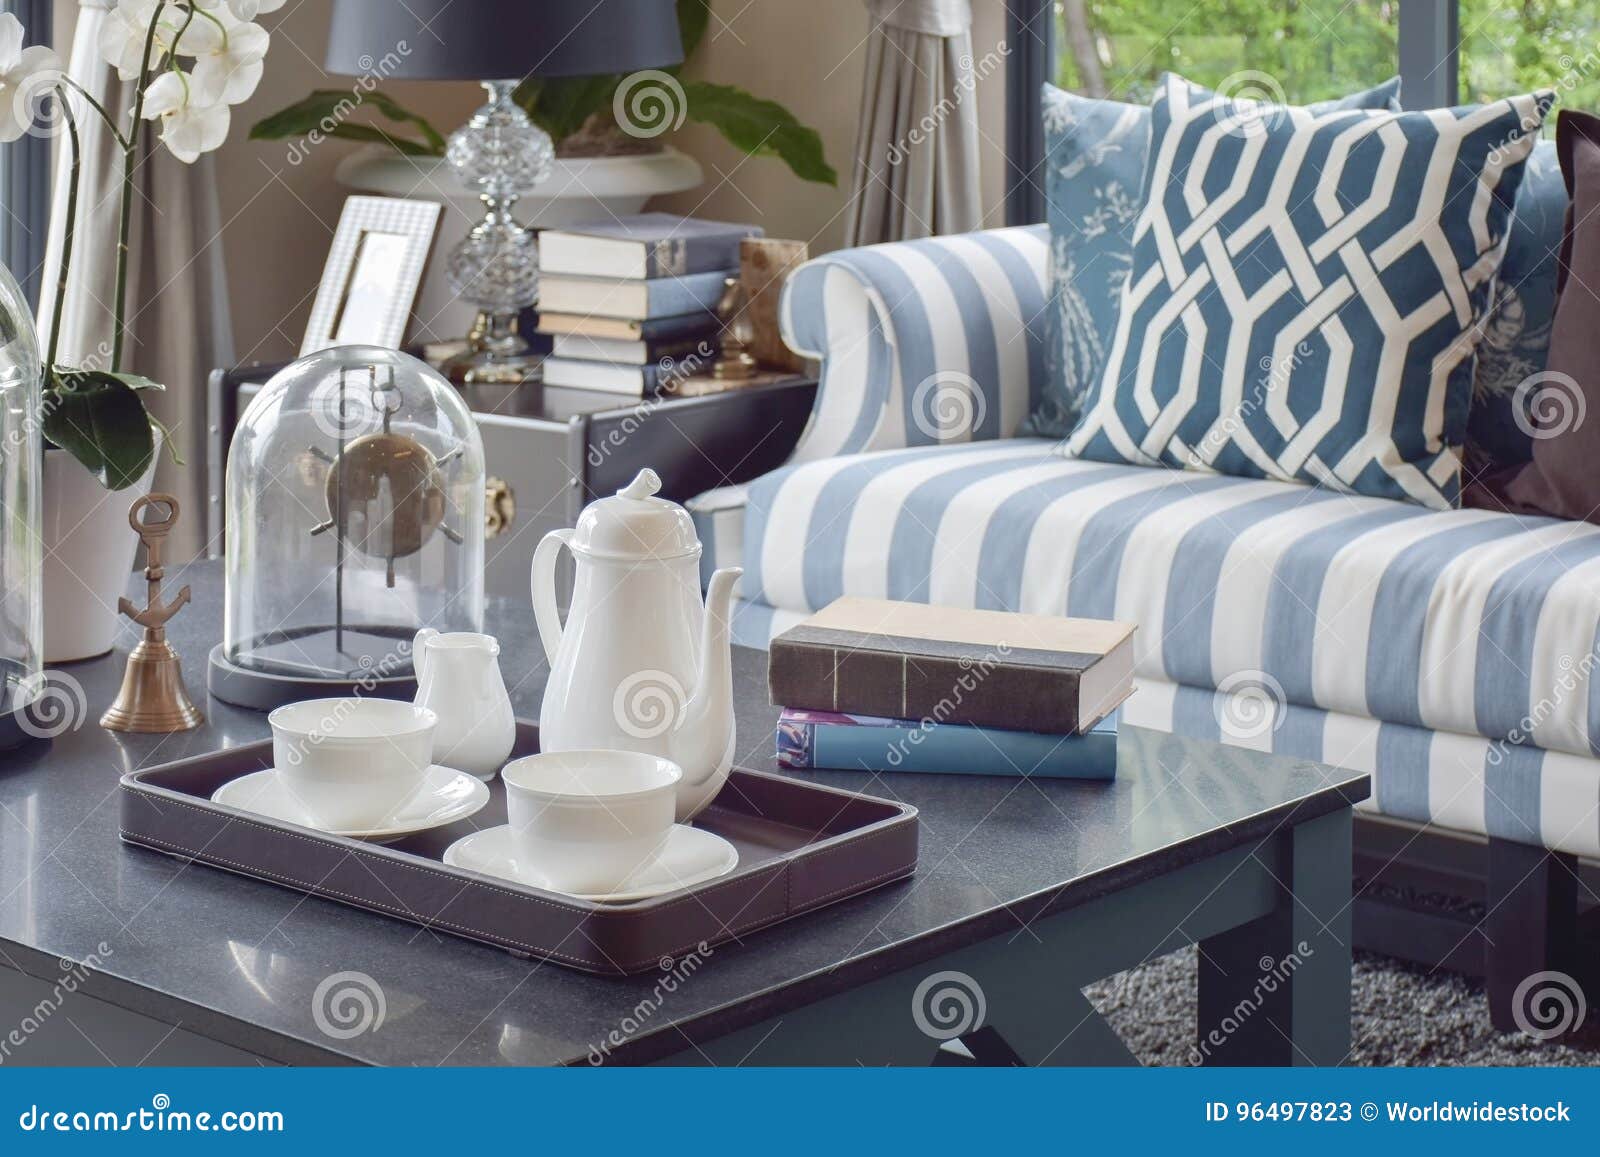 Decorative Tray Of Tea Cup On Wooden Table In Luxury Living Room